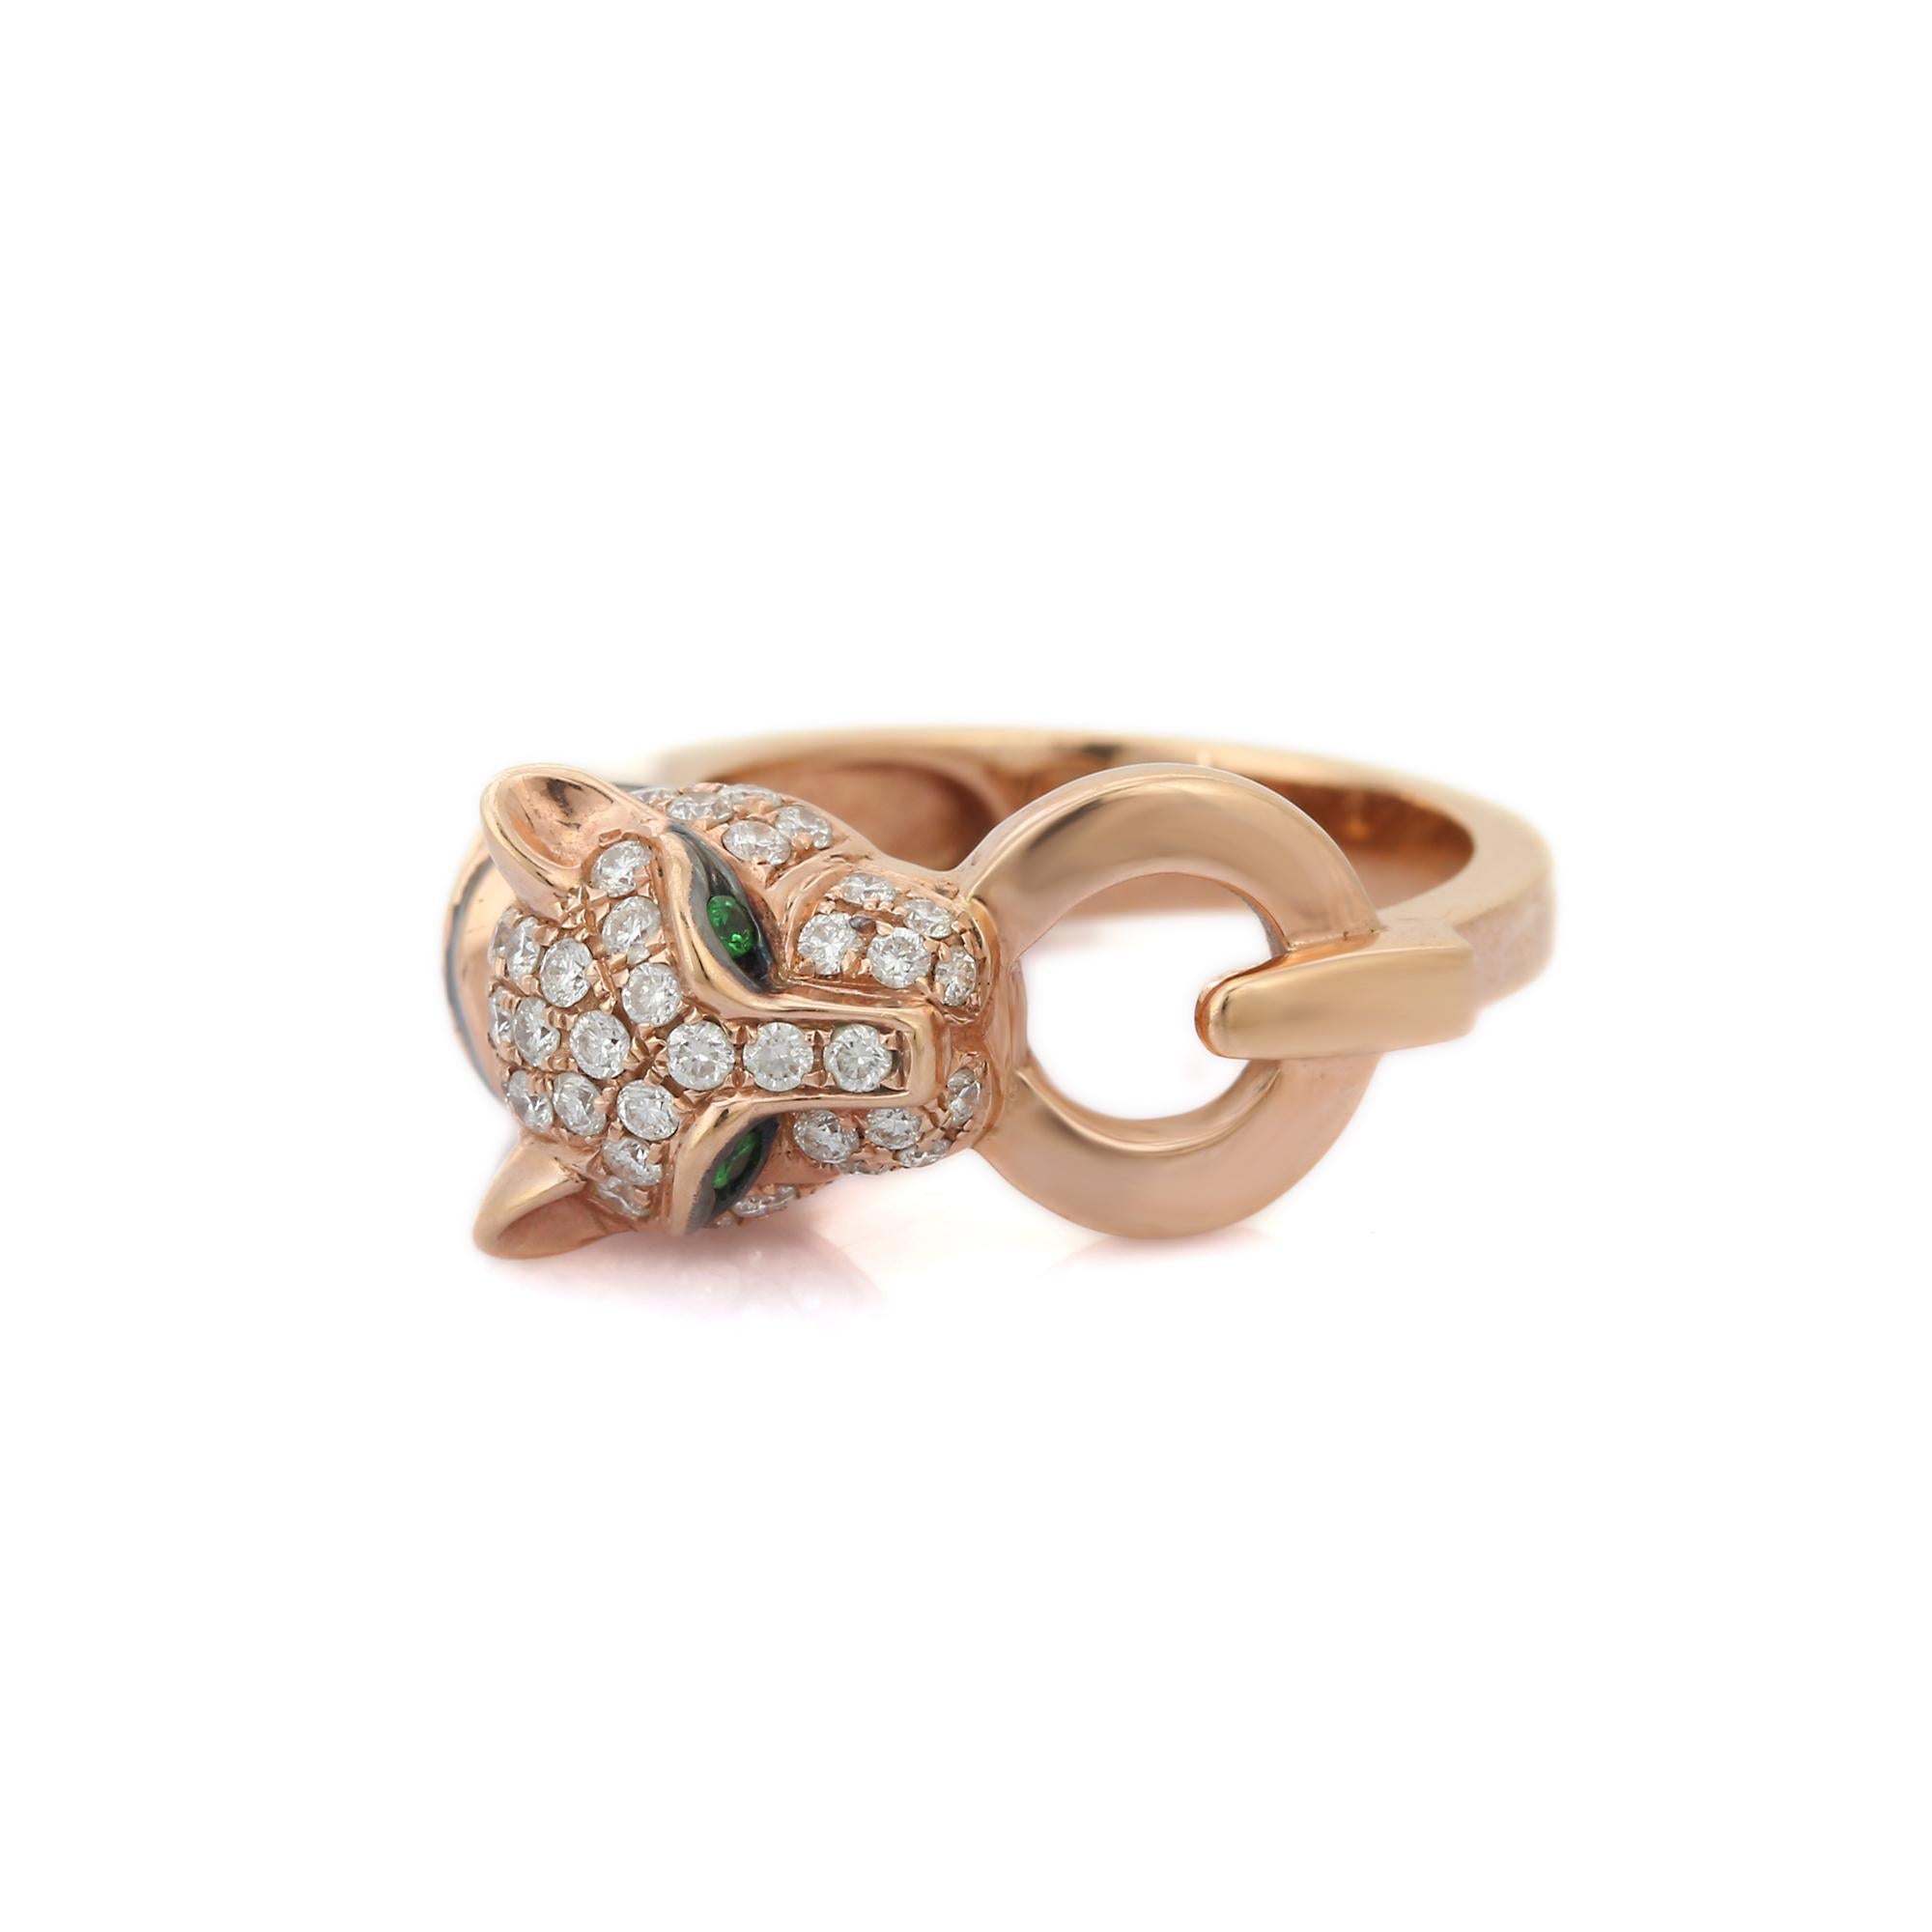 For Sale:  18K Rose Gold Iconic Panther Ring with Tsavorite and Diamond 7